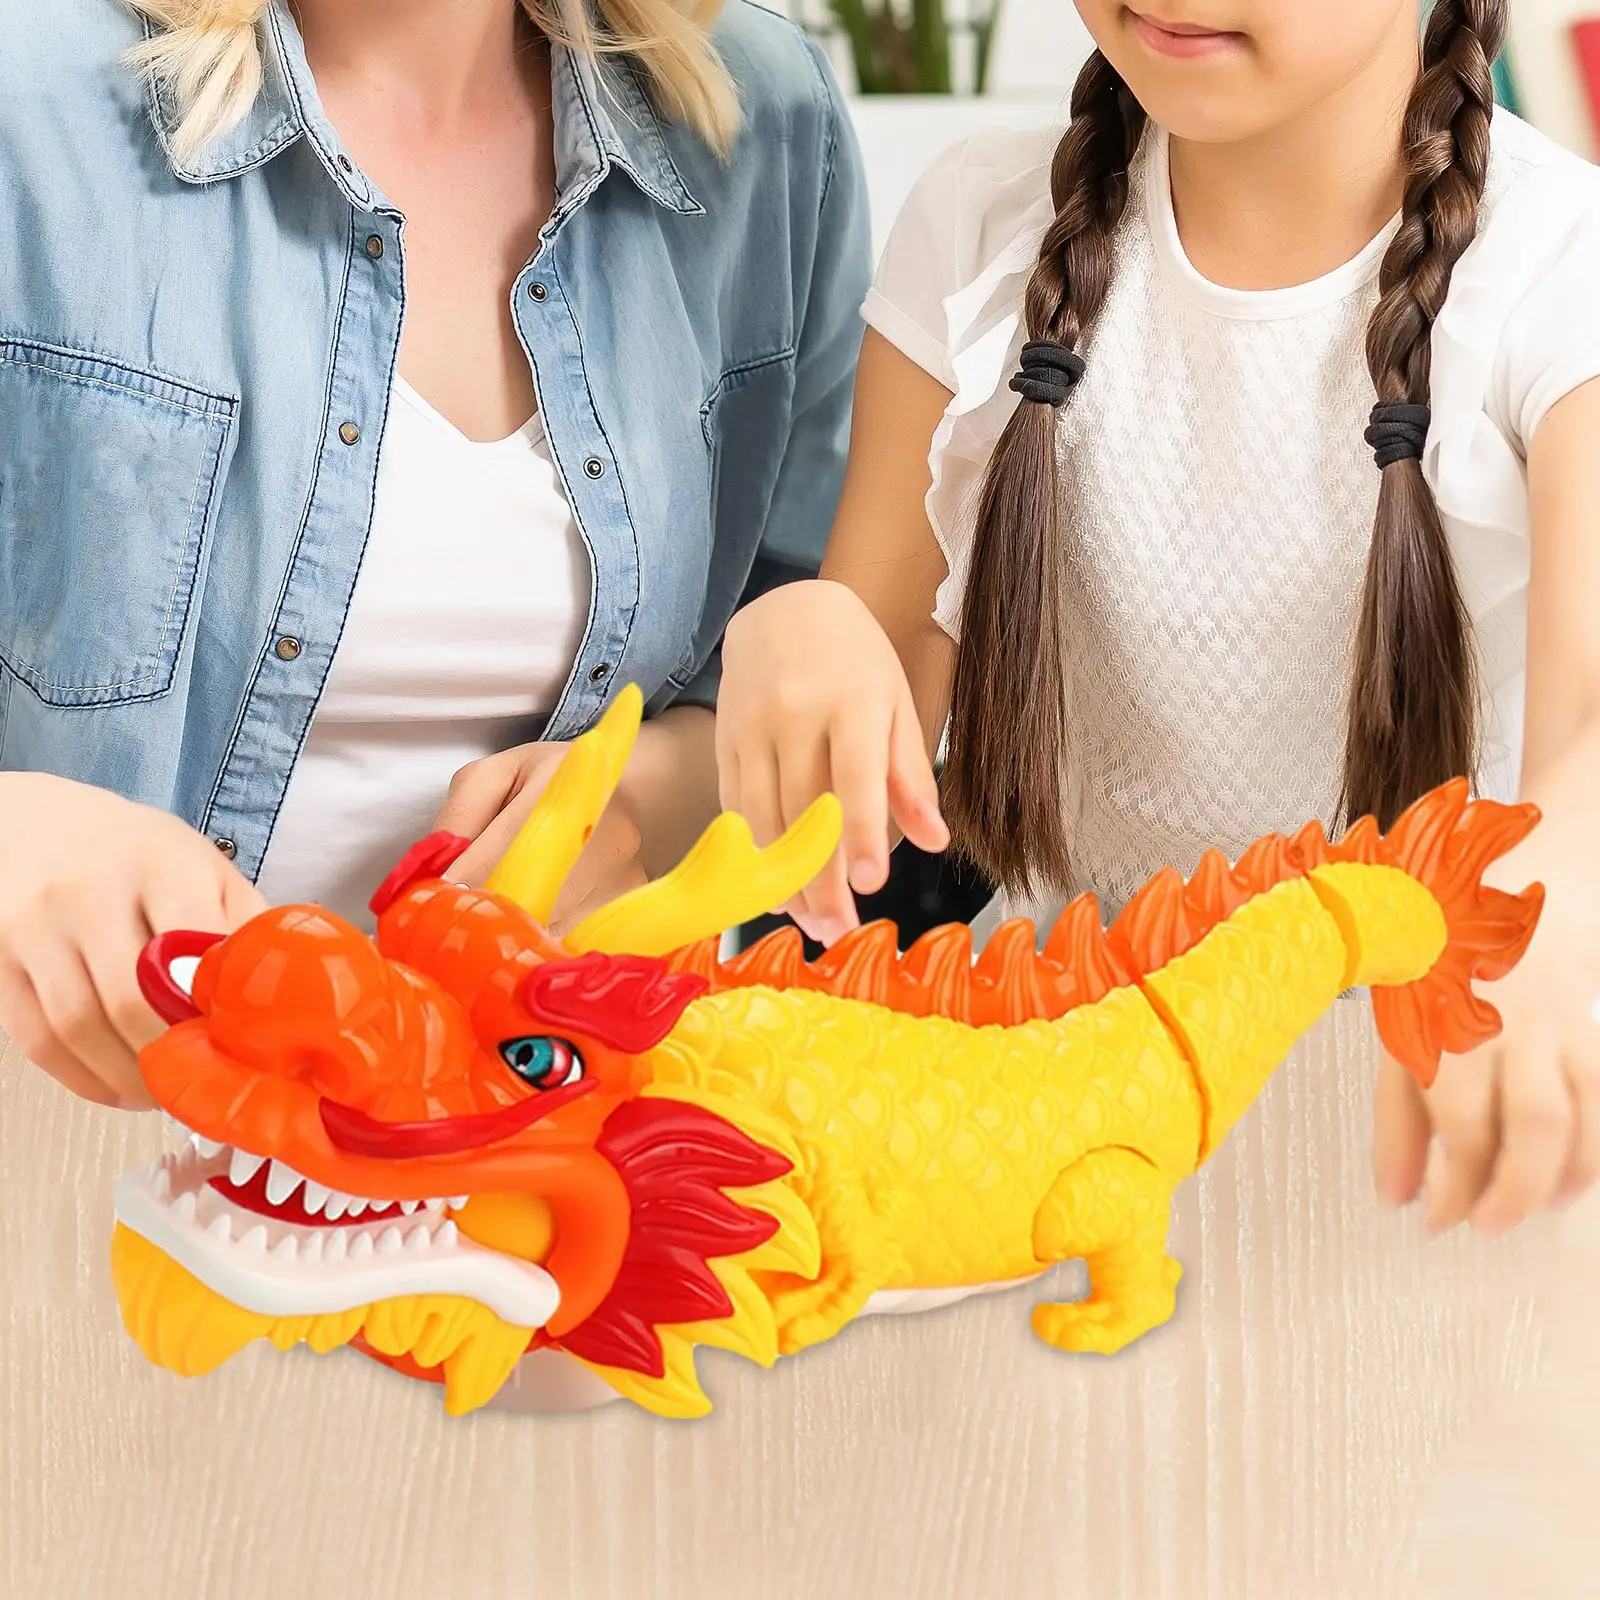 Eletric Dragon Toy Walking High Simulation Novelty Animal Dragon Toy Gifts Crawling Toy for Adults Children Kid Boys Age 8-12